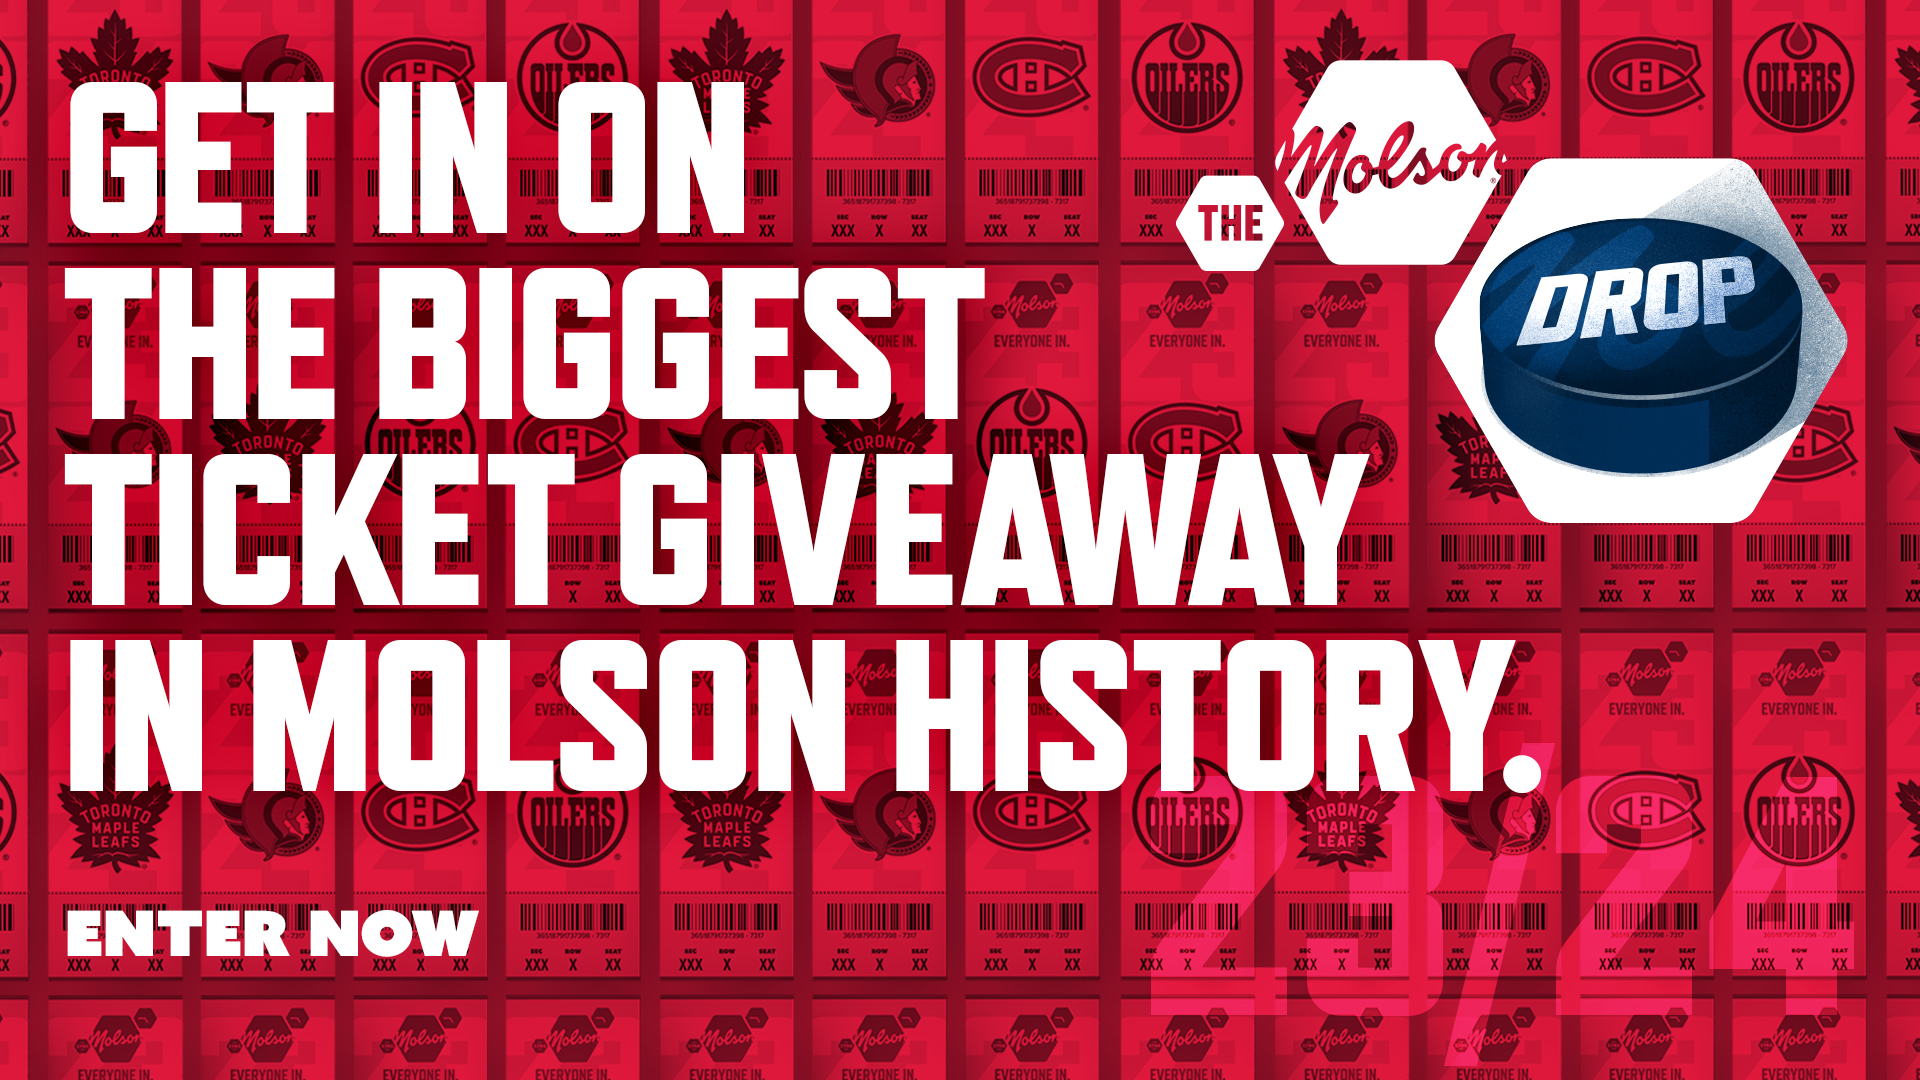 get in on the biggest ticket giveaway in molson history